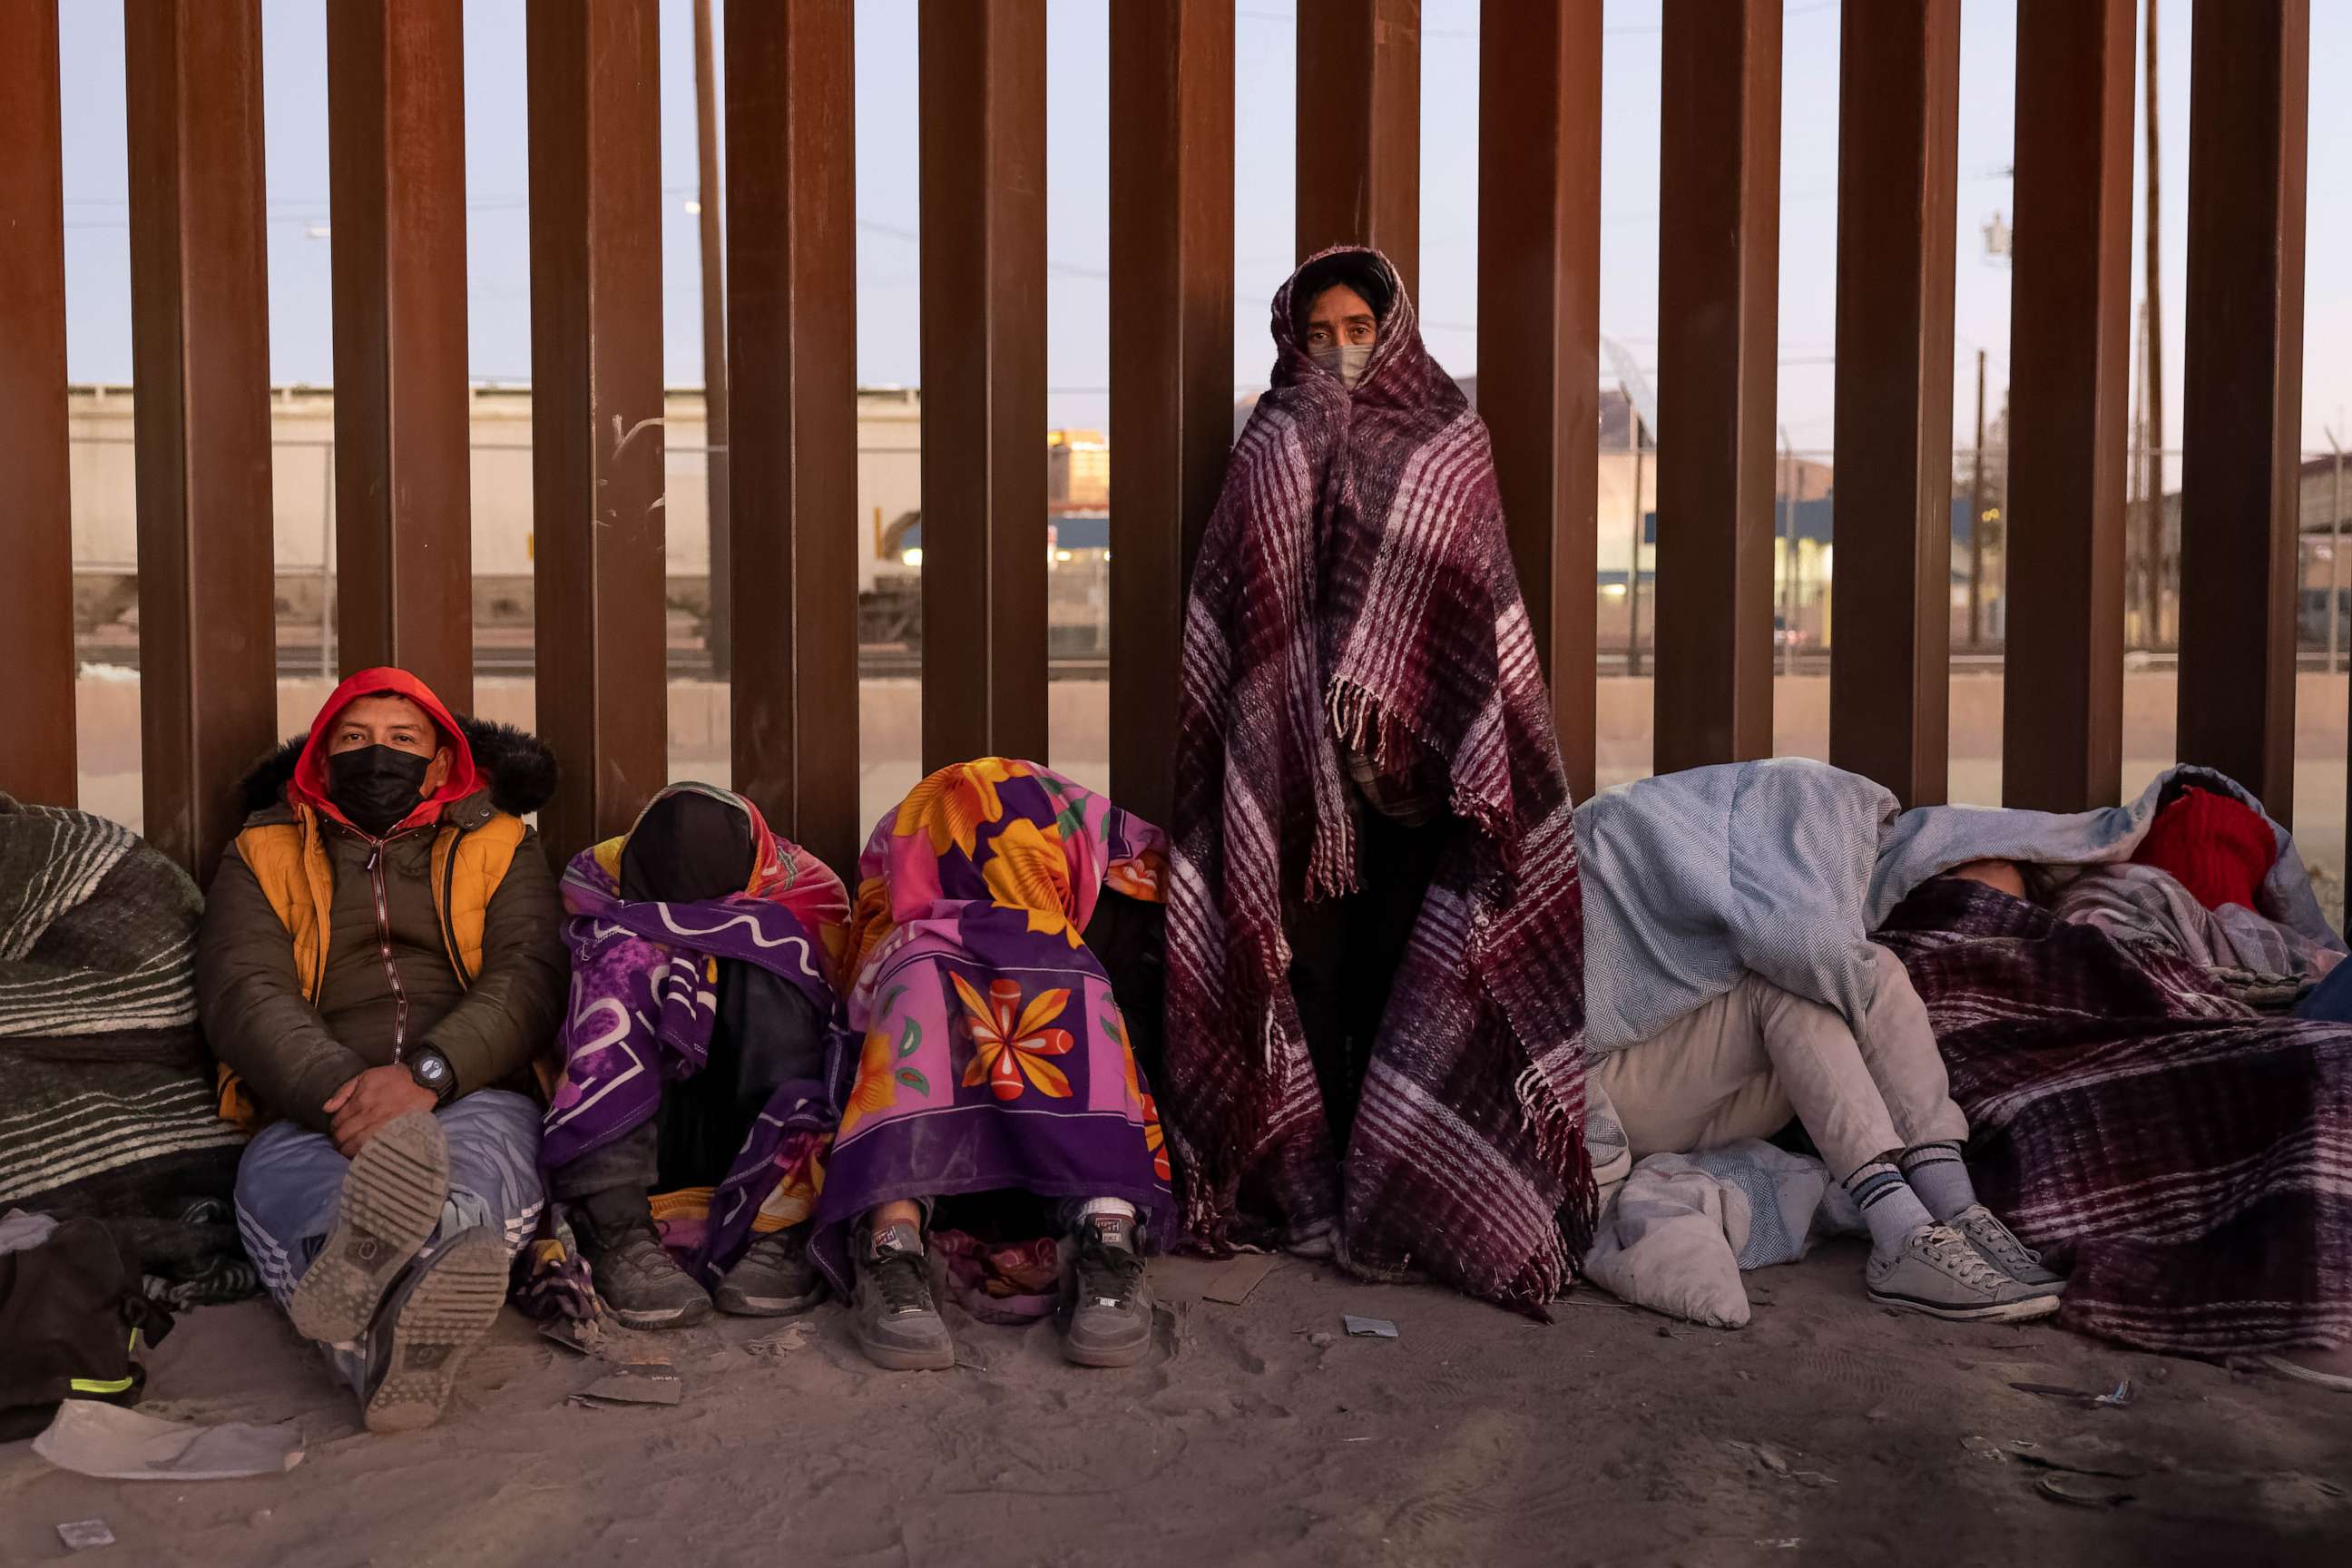 PHOTO: Immigrants bundle up against the cold after spending the night outside along the U.S.-Mexico border fence on Dec. 22, 2022, in El Paso, Texas.